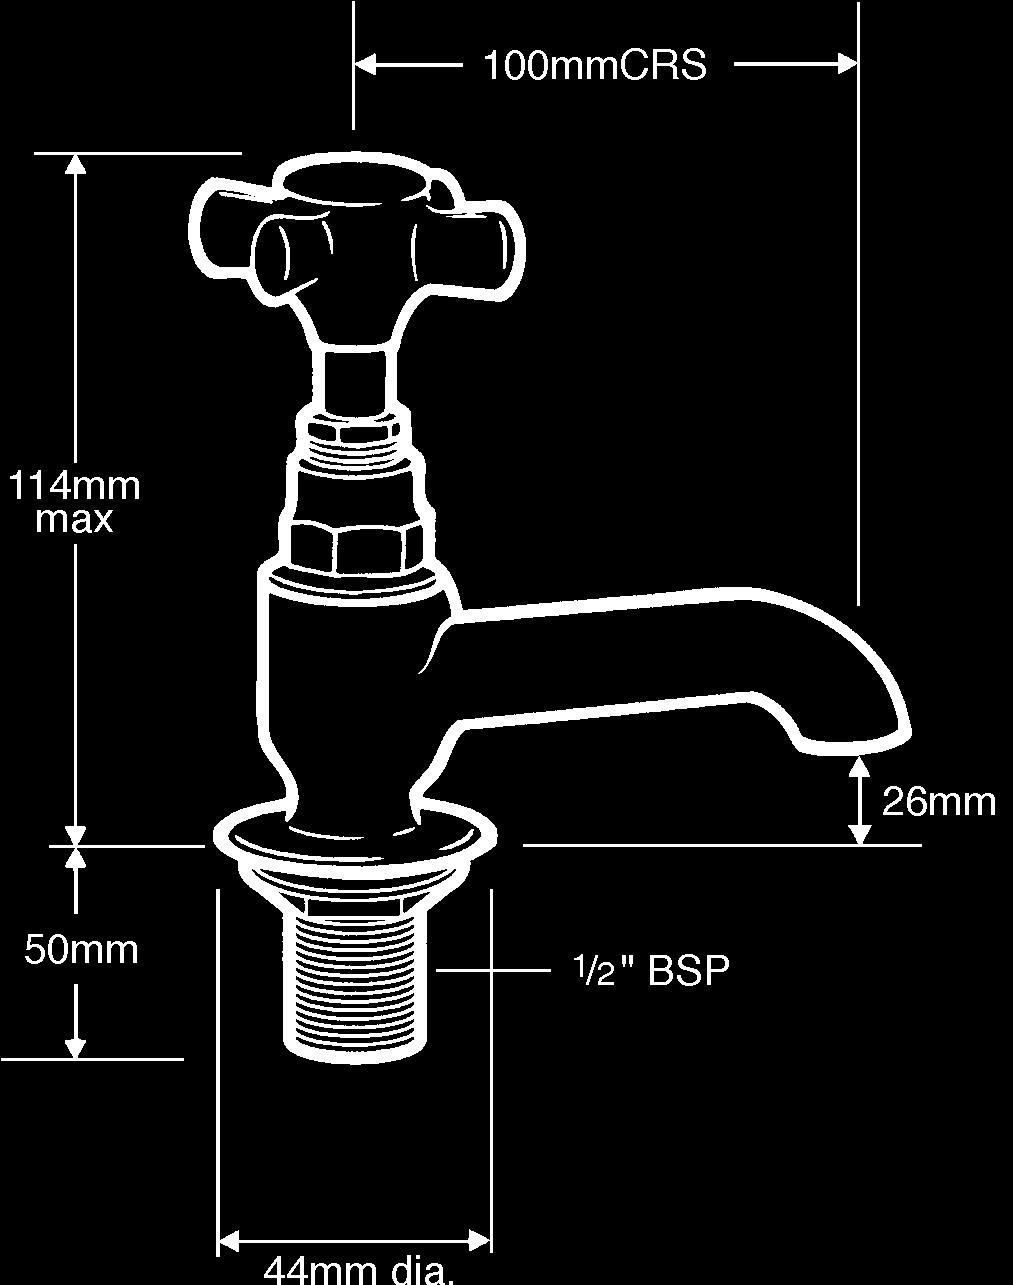 with pop-up waste basin mixer SEQUEL DIMENSIONS 70 CRS 114 max 20 50 Ø44 1/2"